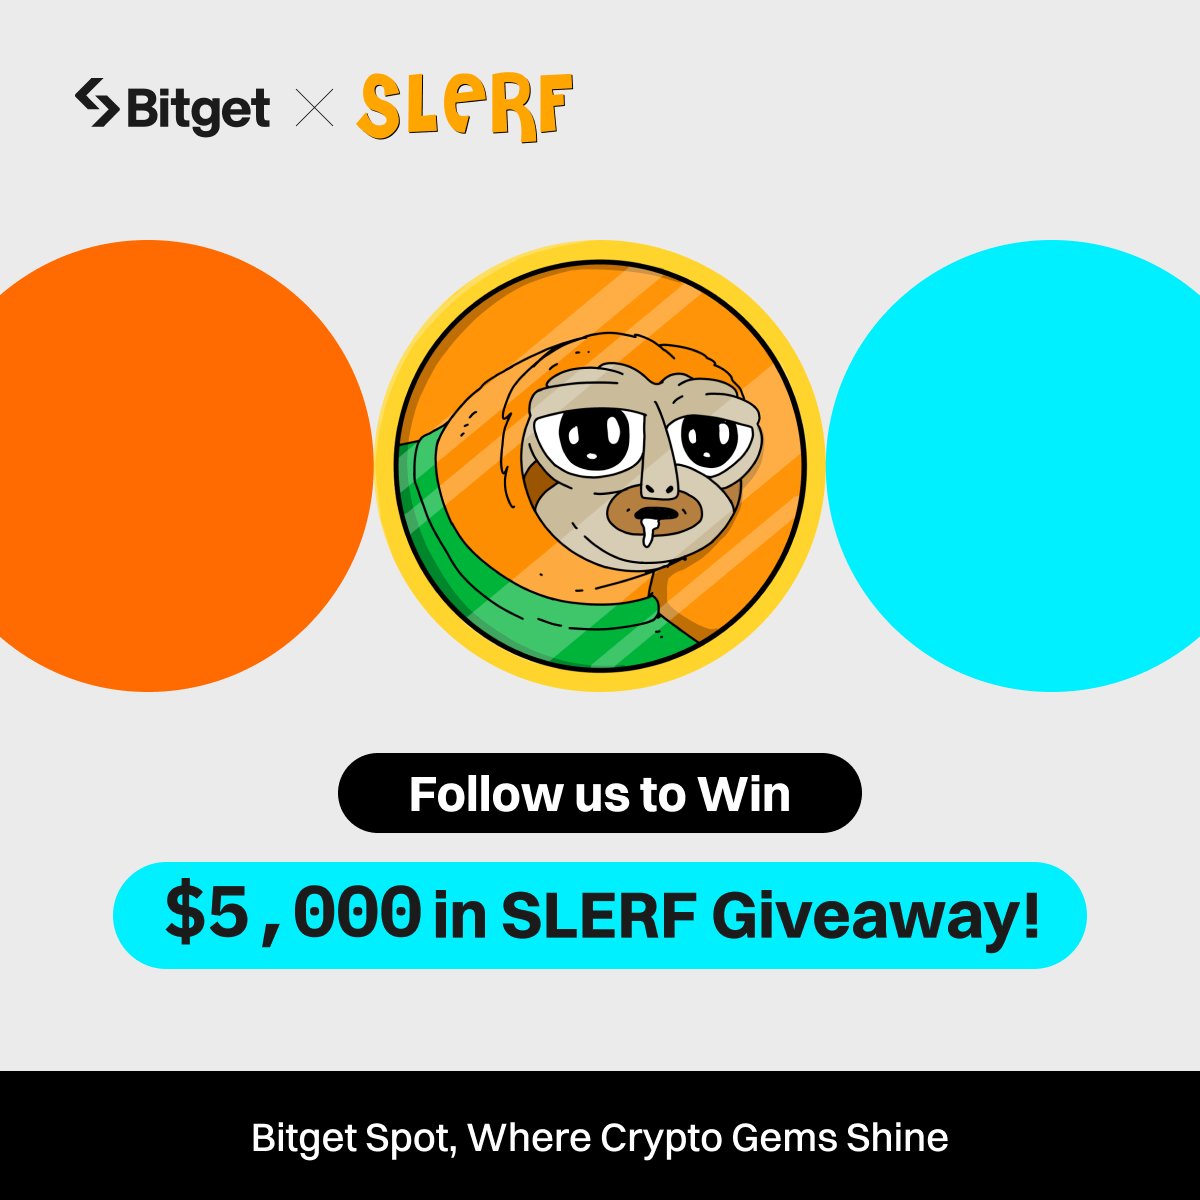 Join the #Bitget x #SLERF Giveaway! 💰 $5,000 worth of $SLERF (100 winners) 1️⃣ Follow @bitgetglobal 2⃣ Repost with #SLERFxBitget & tag your friends 3⃣ Fill out the form: forms.gle/QGrF9v6XRh4dsE…